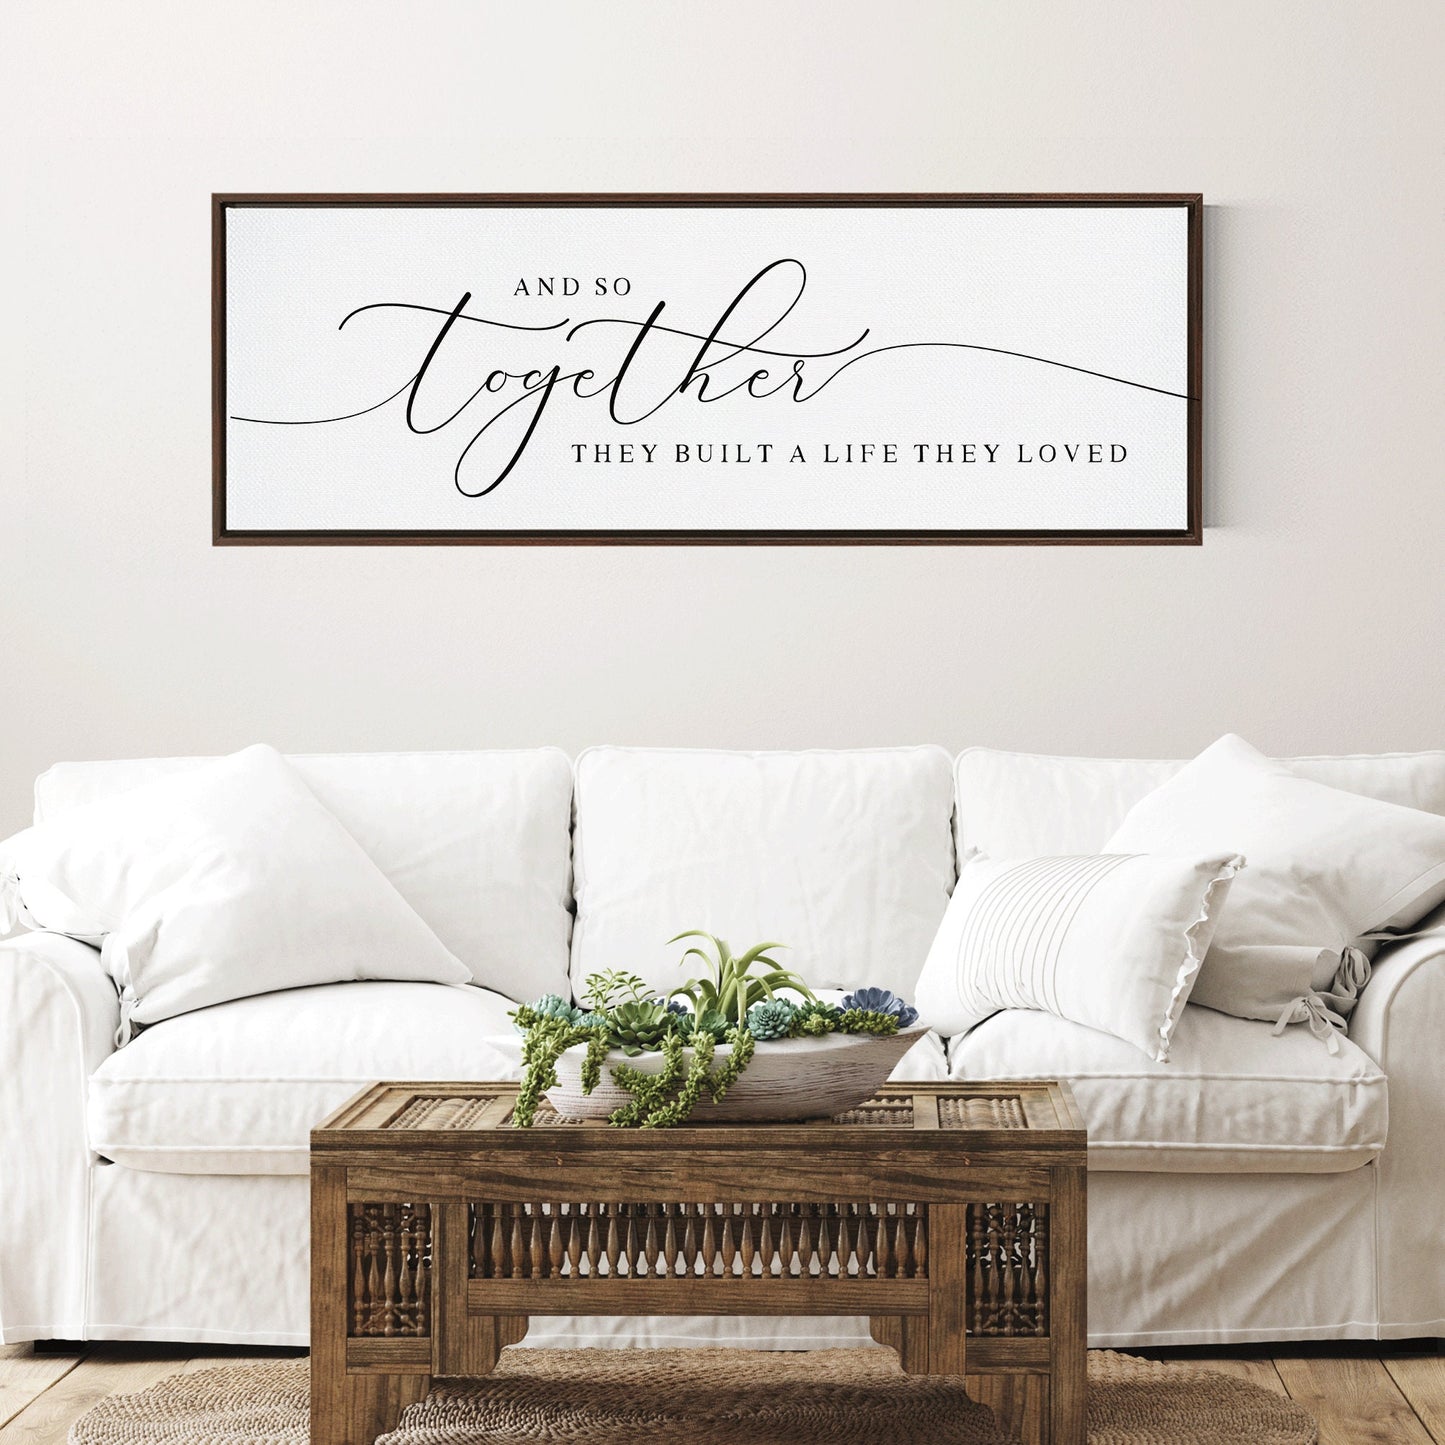 So Together They Built A Life They Loved Sign | His And Hers Canvas Wall Art Framed | Master Bedroom Above the Bed Prints | Gifts for Wife